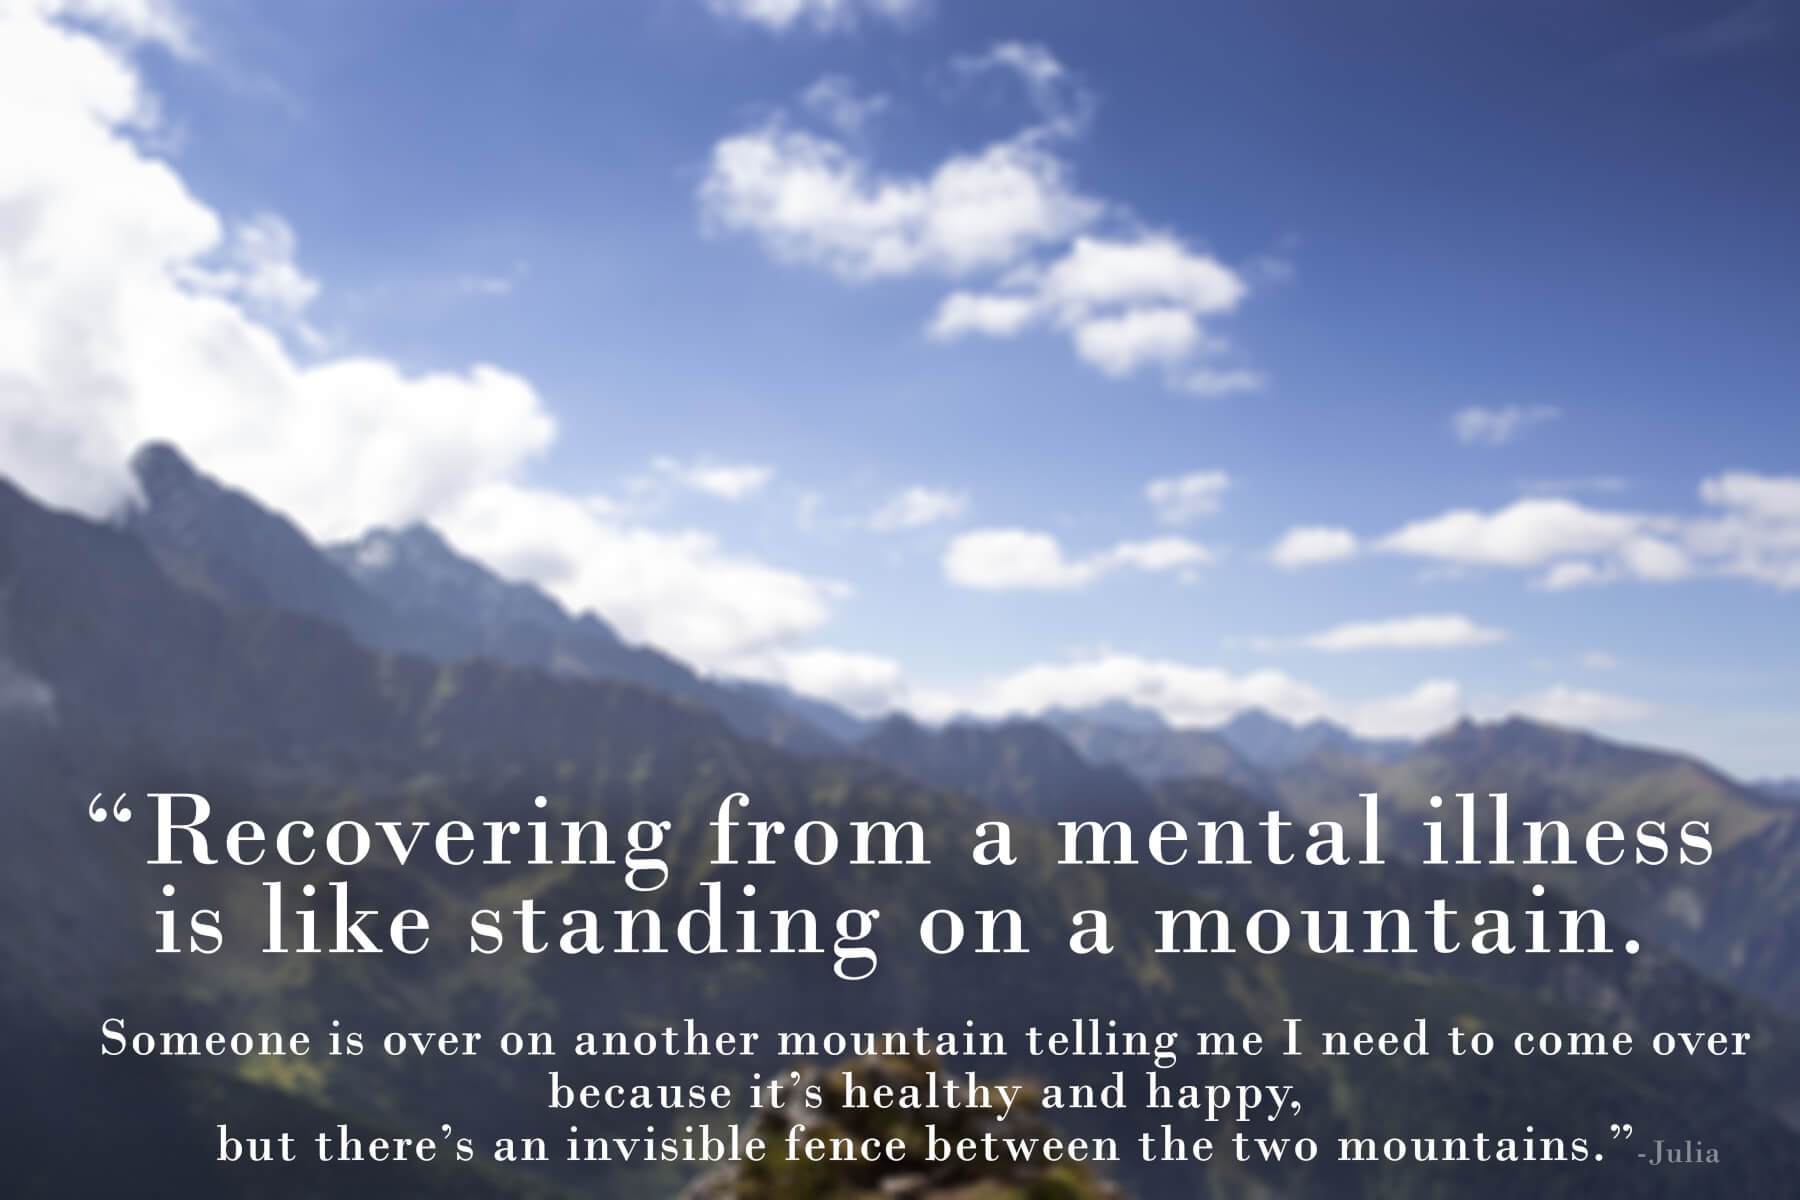 Quote from Julia "recovering from a mental illness is like standing on a mountain. Someone is over on another mountain telling me I need to come over because it's healthy and happy, but there's an invisible fence between the two mountains."